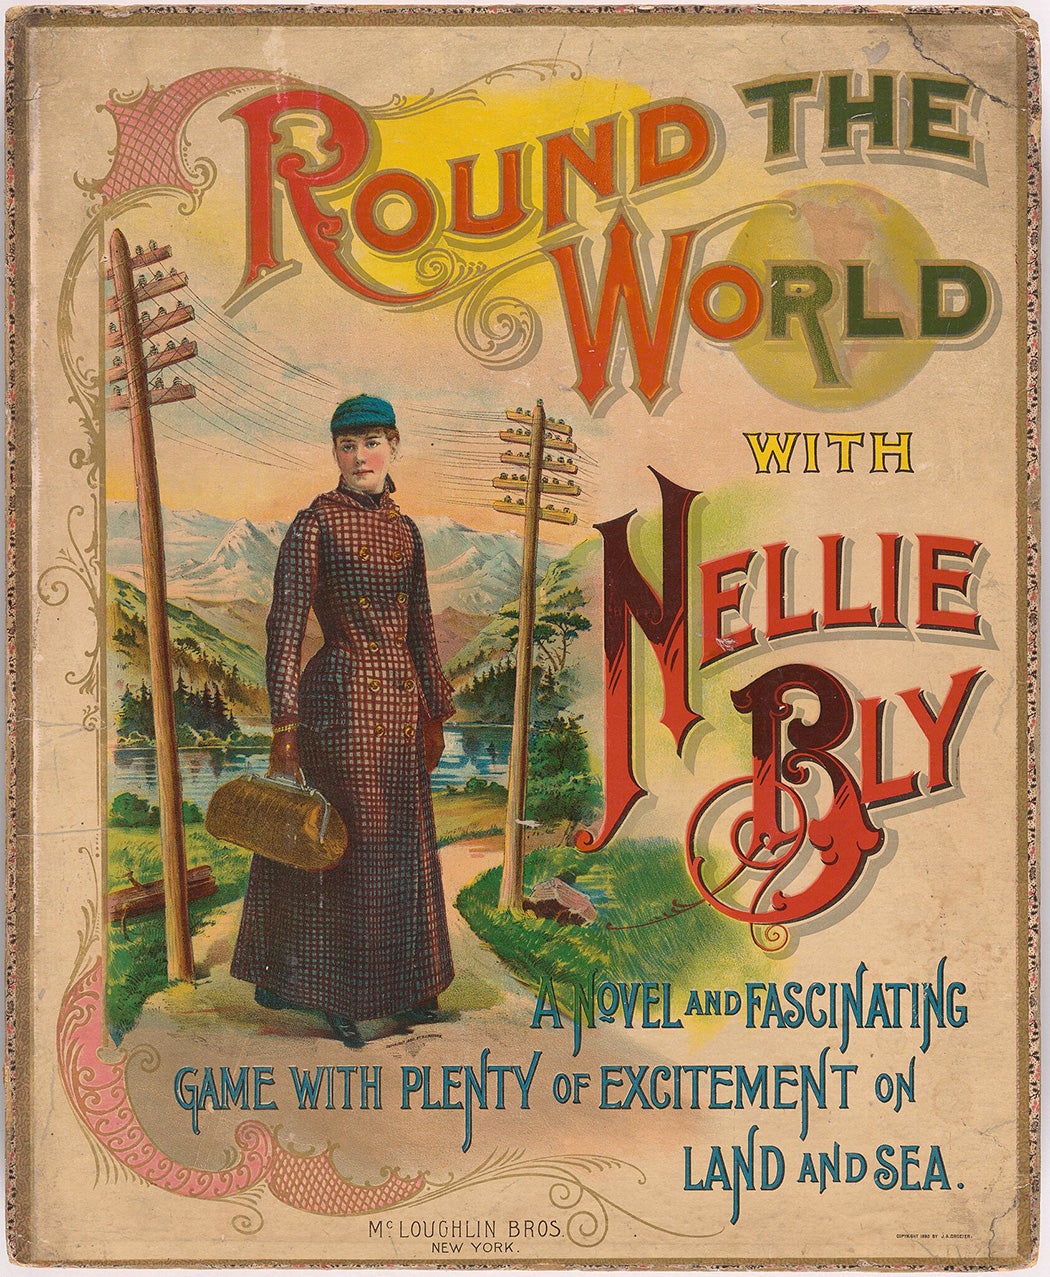 The boardgames Round the World with Nellie Bly (1890)